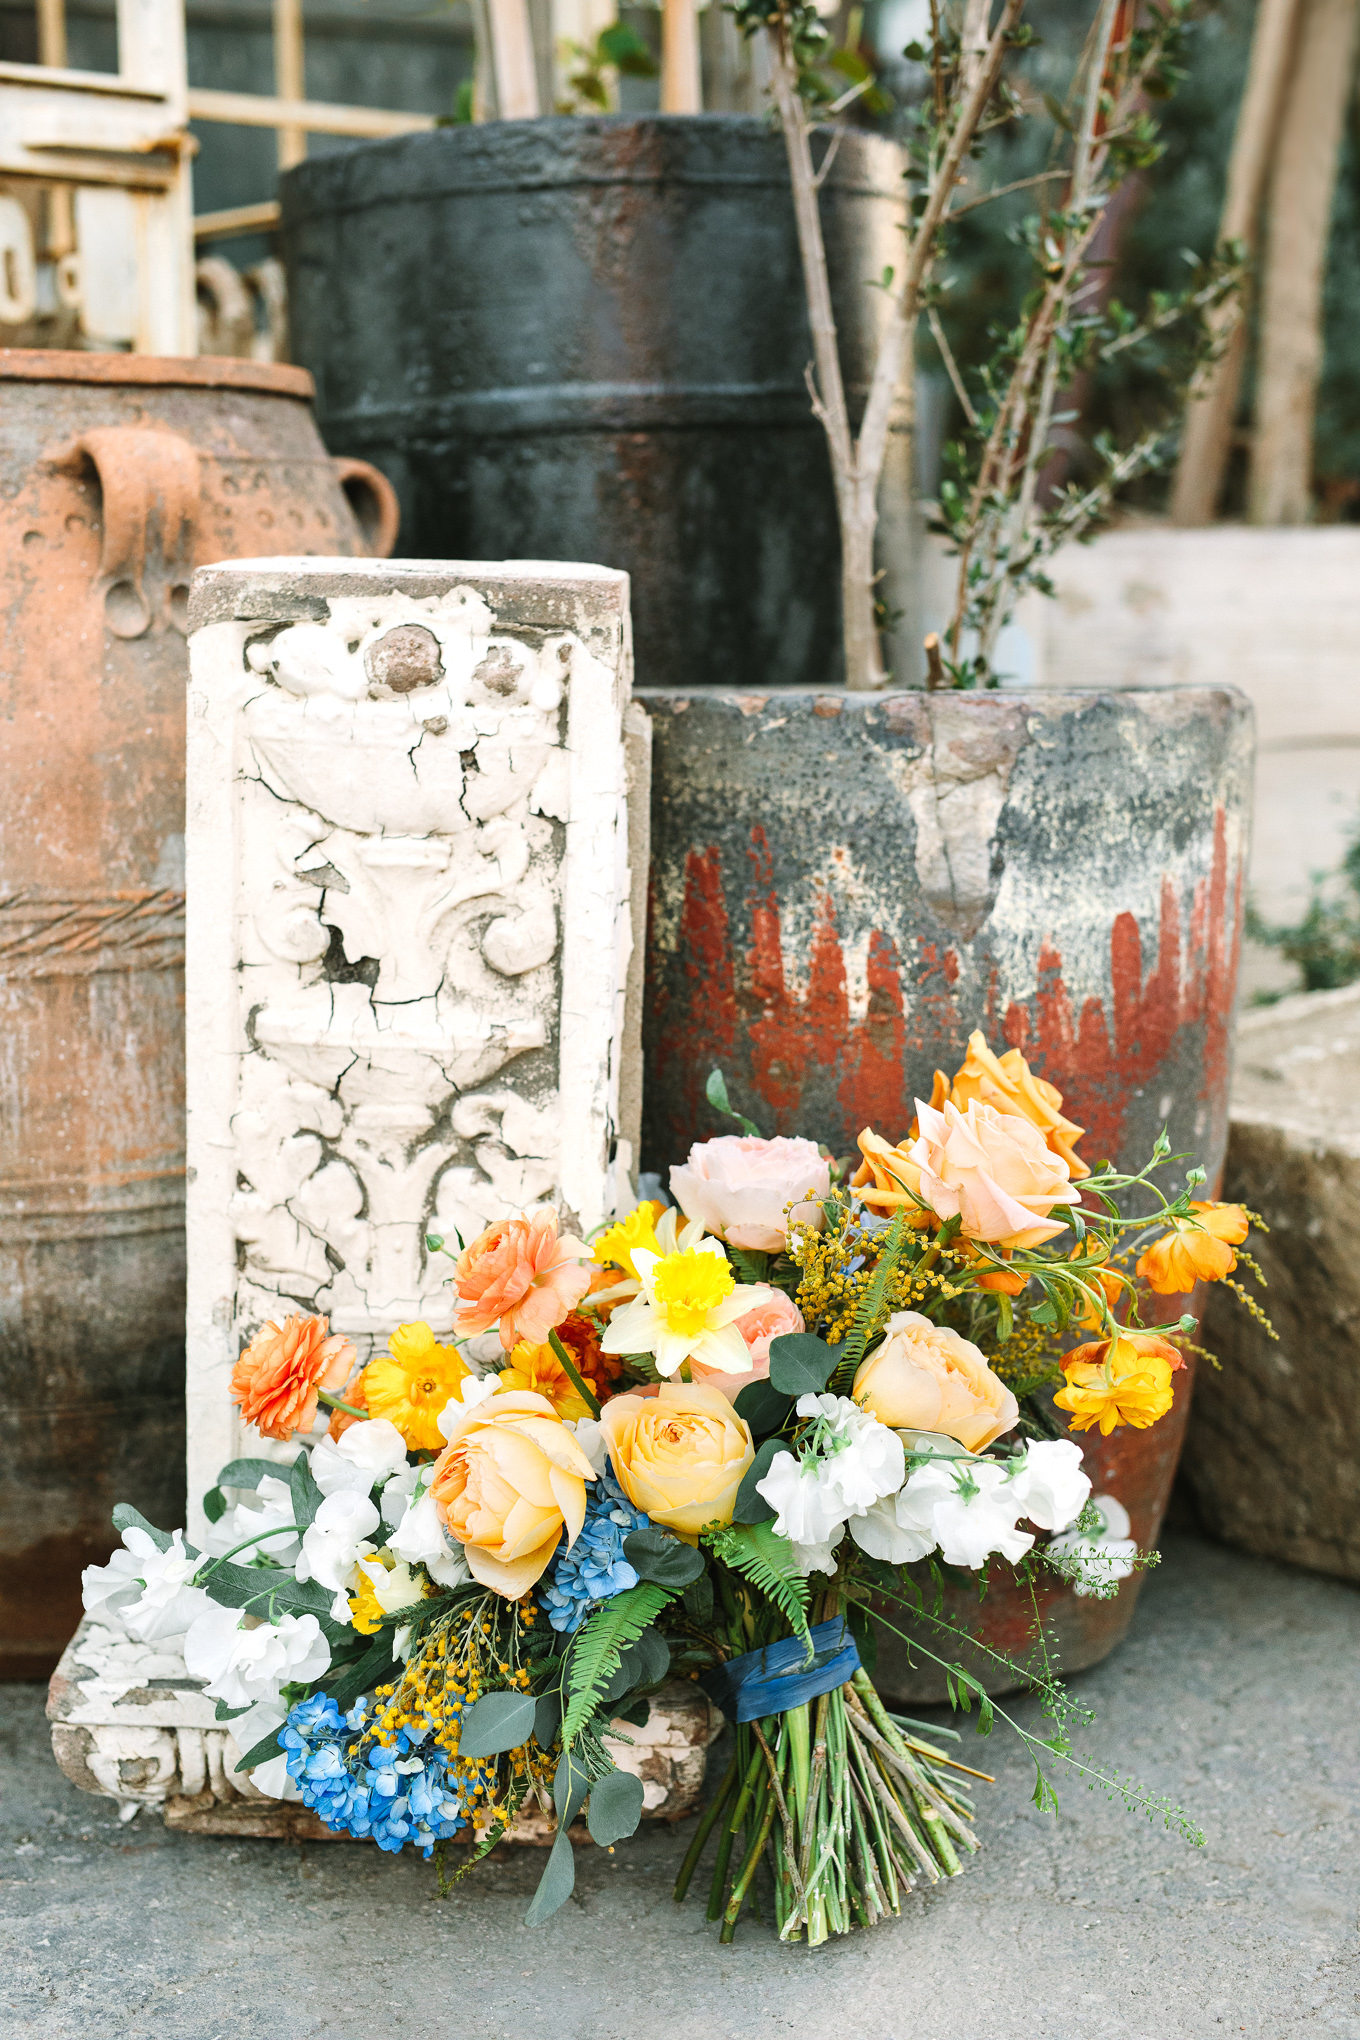 Beautiful yellow, peach and light blue bouquet | Beautiful bridal bouquet inspiration and advice | Colorful and elevated wedding photography for fun-loving couples in Southern California | #weddingflowers #weddingbouquet #bridebouquet #bouquetideas #uniquebouquet   Source: Mary Costa Photography | Los Angeles